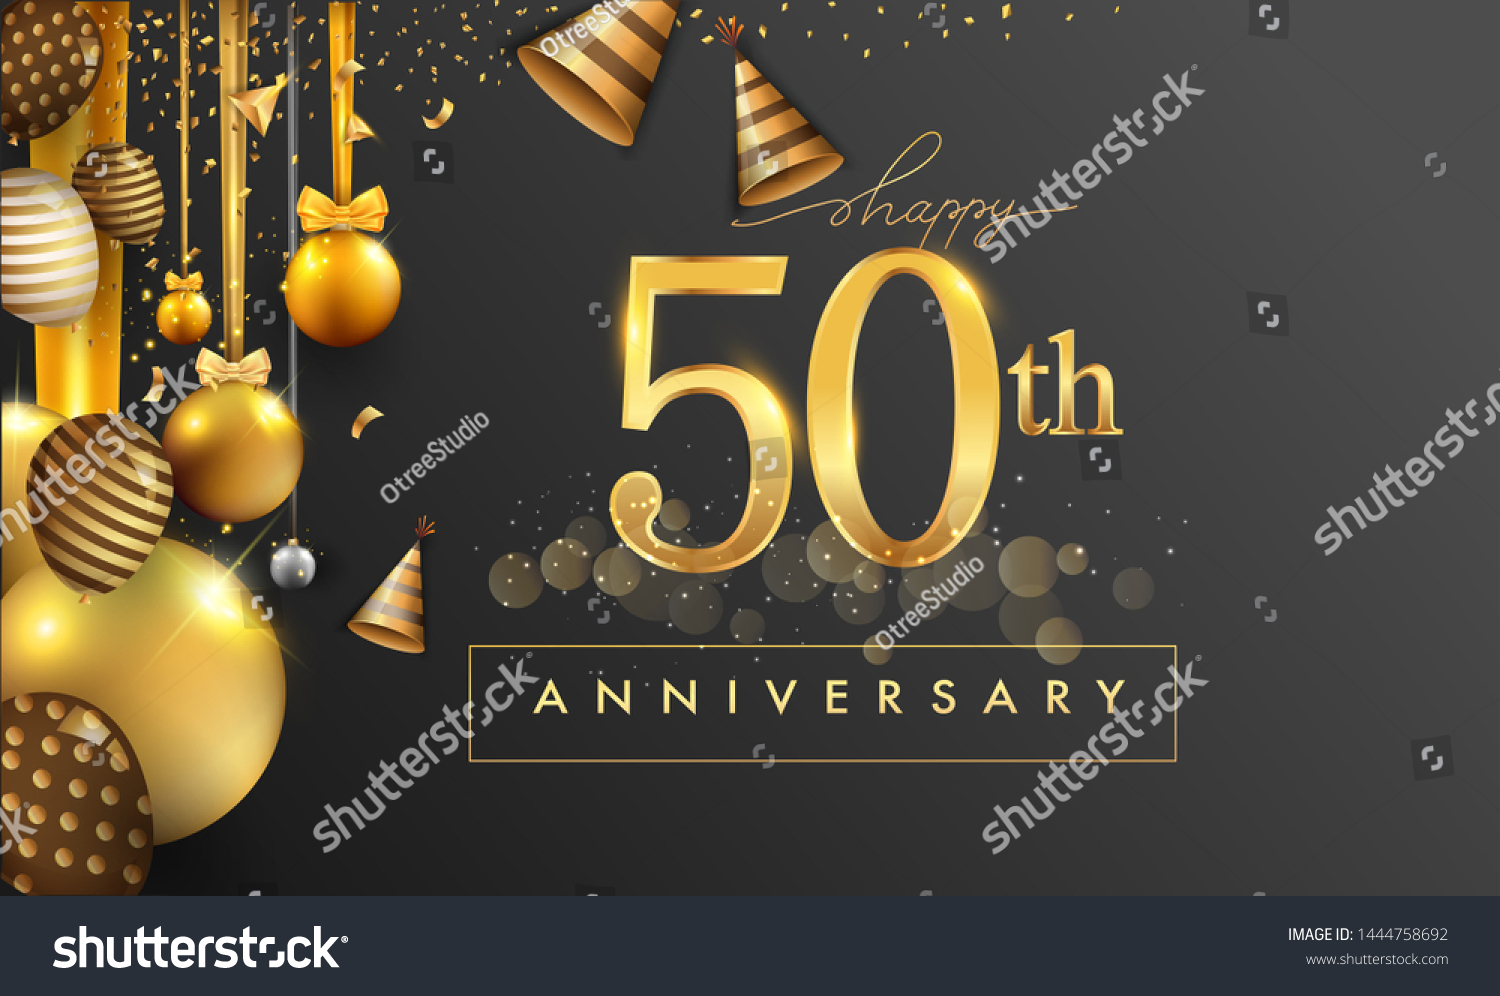 SVG of 50th years anniversary design for greeting cards and invitation, with balloon, confetti and gift box, elegant design with gold and dark color, design template for birthday celebration. svg